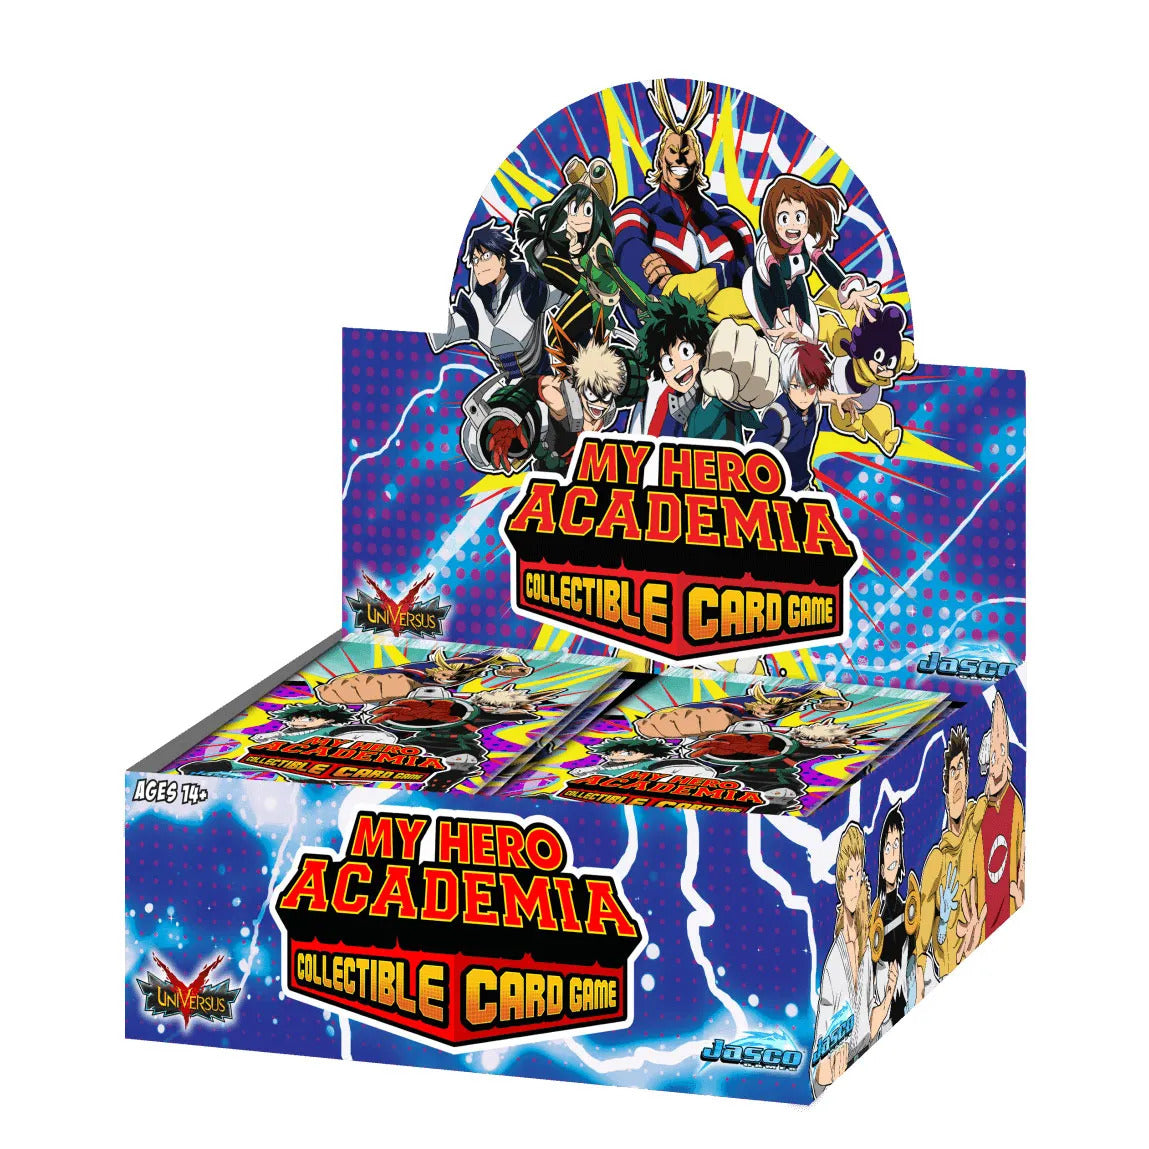 My Hero Academia CCG: Wave 1 1st Edition Booster Box